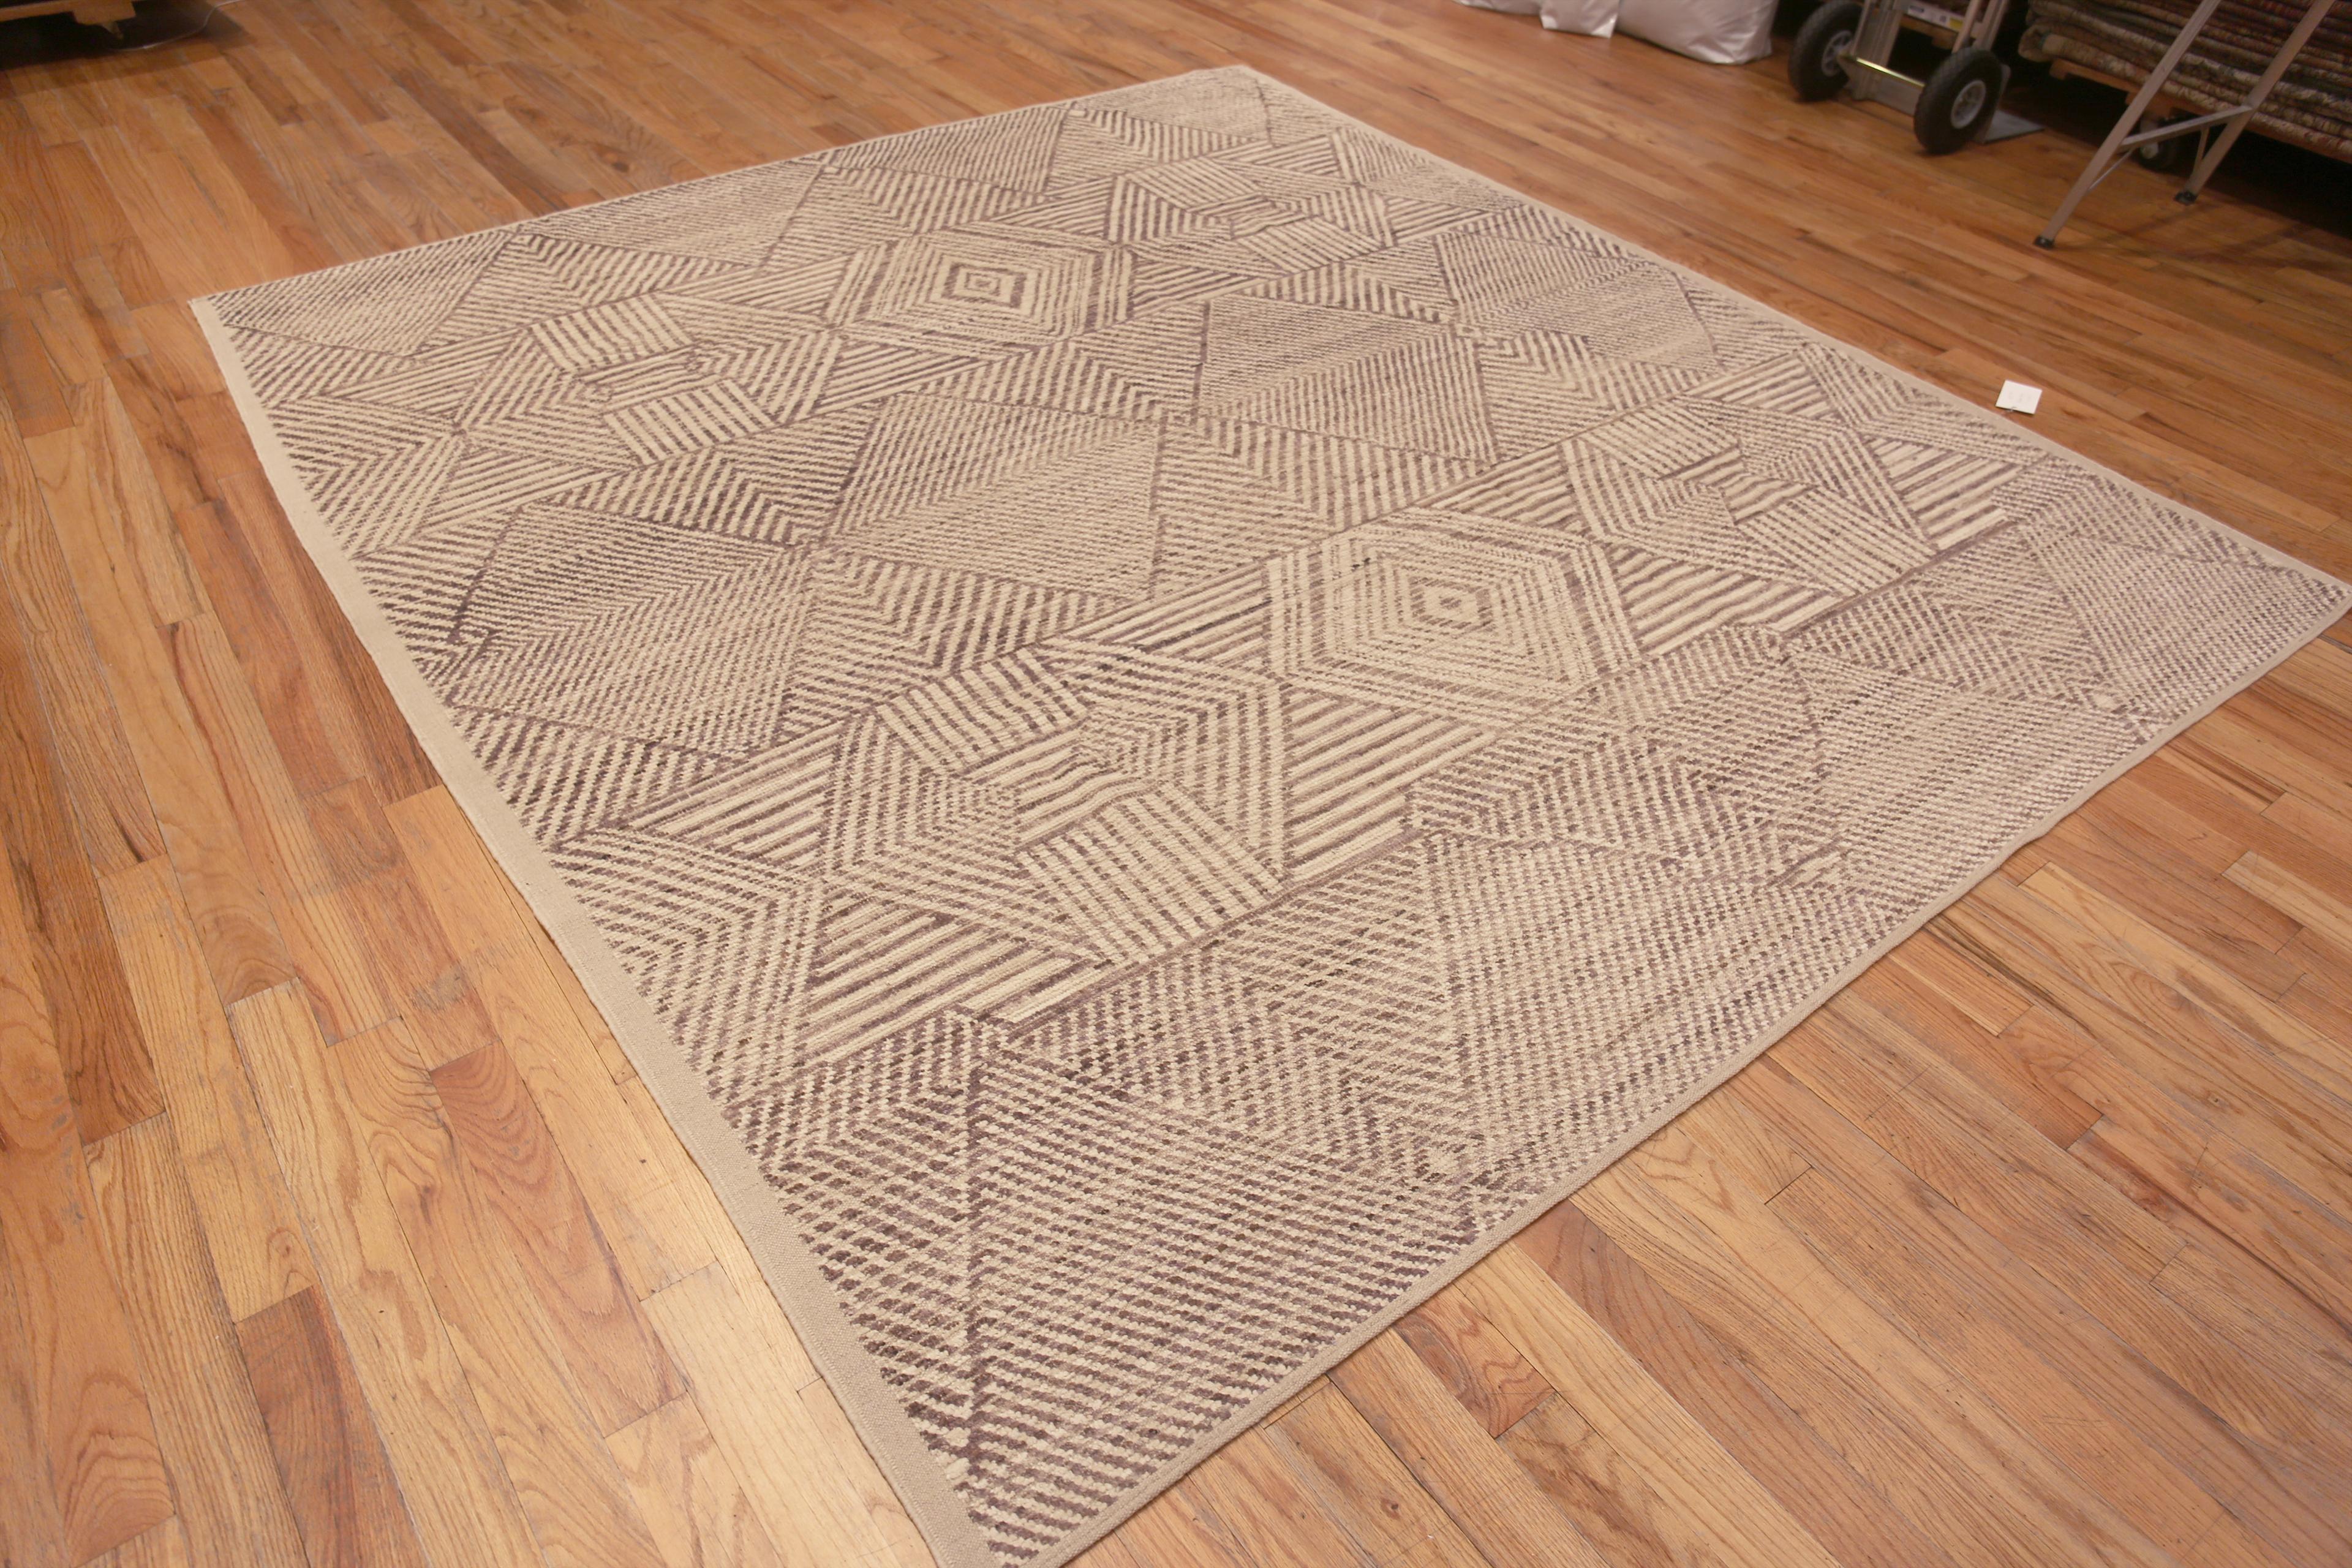 Elegant North African Inspired Tribal Design Modern Geometric Neutral Color Area Rug, Country of origin: Central Asia, Circa date: Modern Rugs